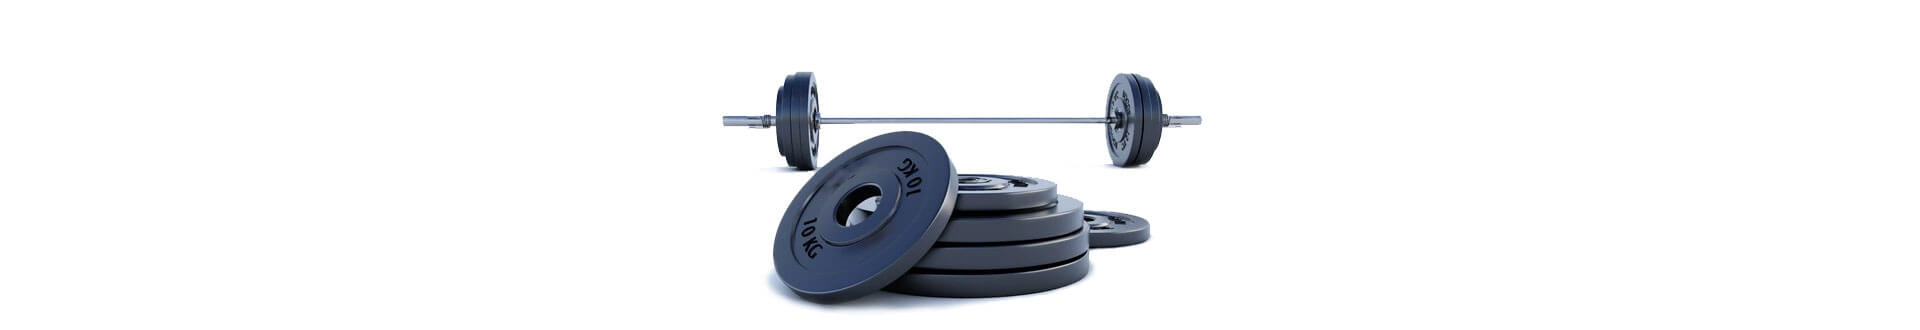 weights-on-ground-1920x330-home-img